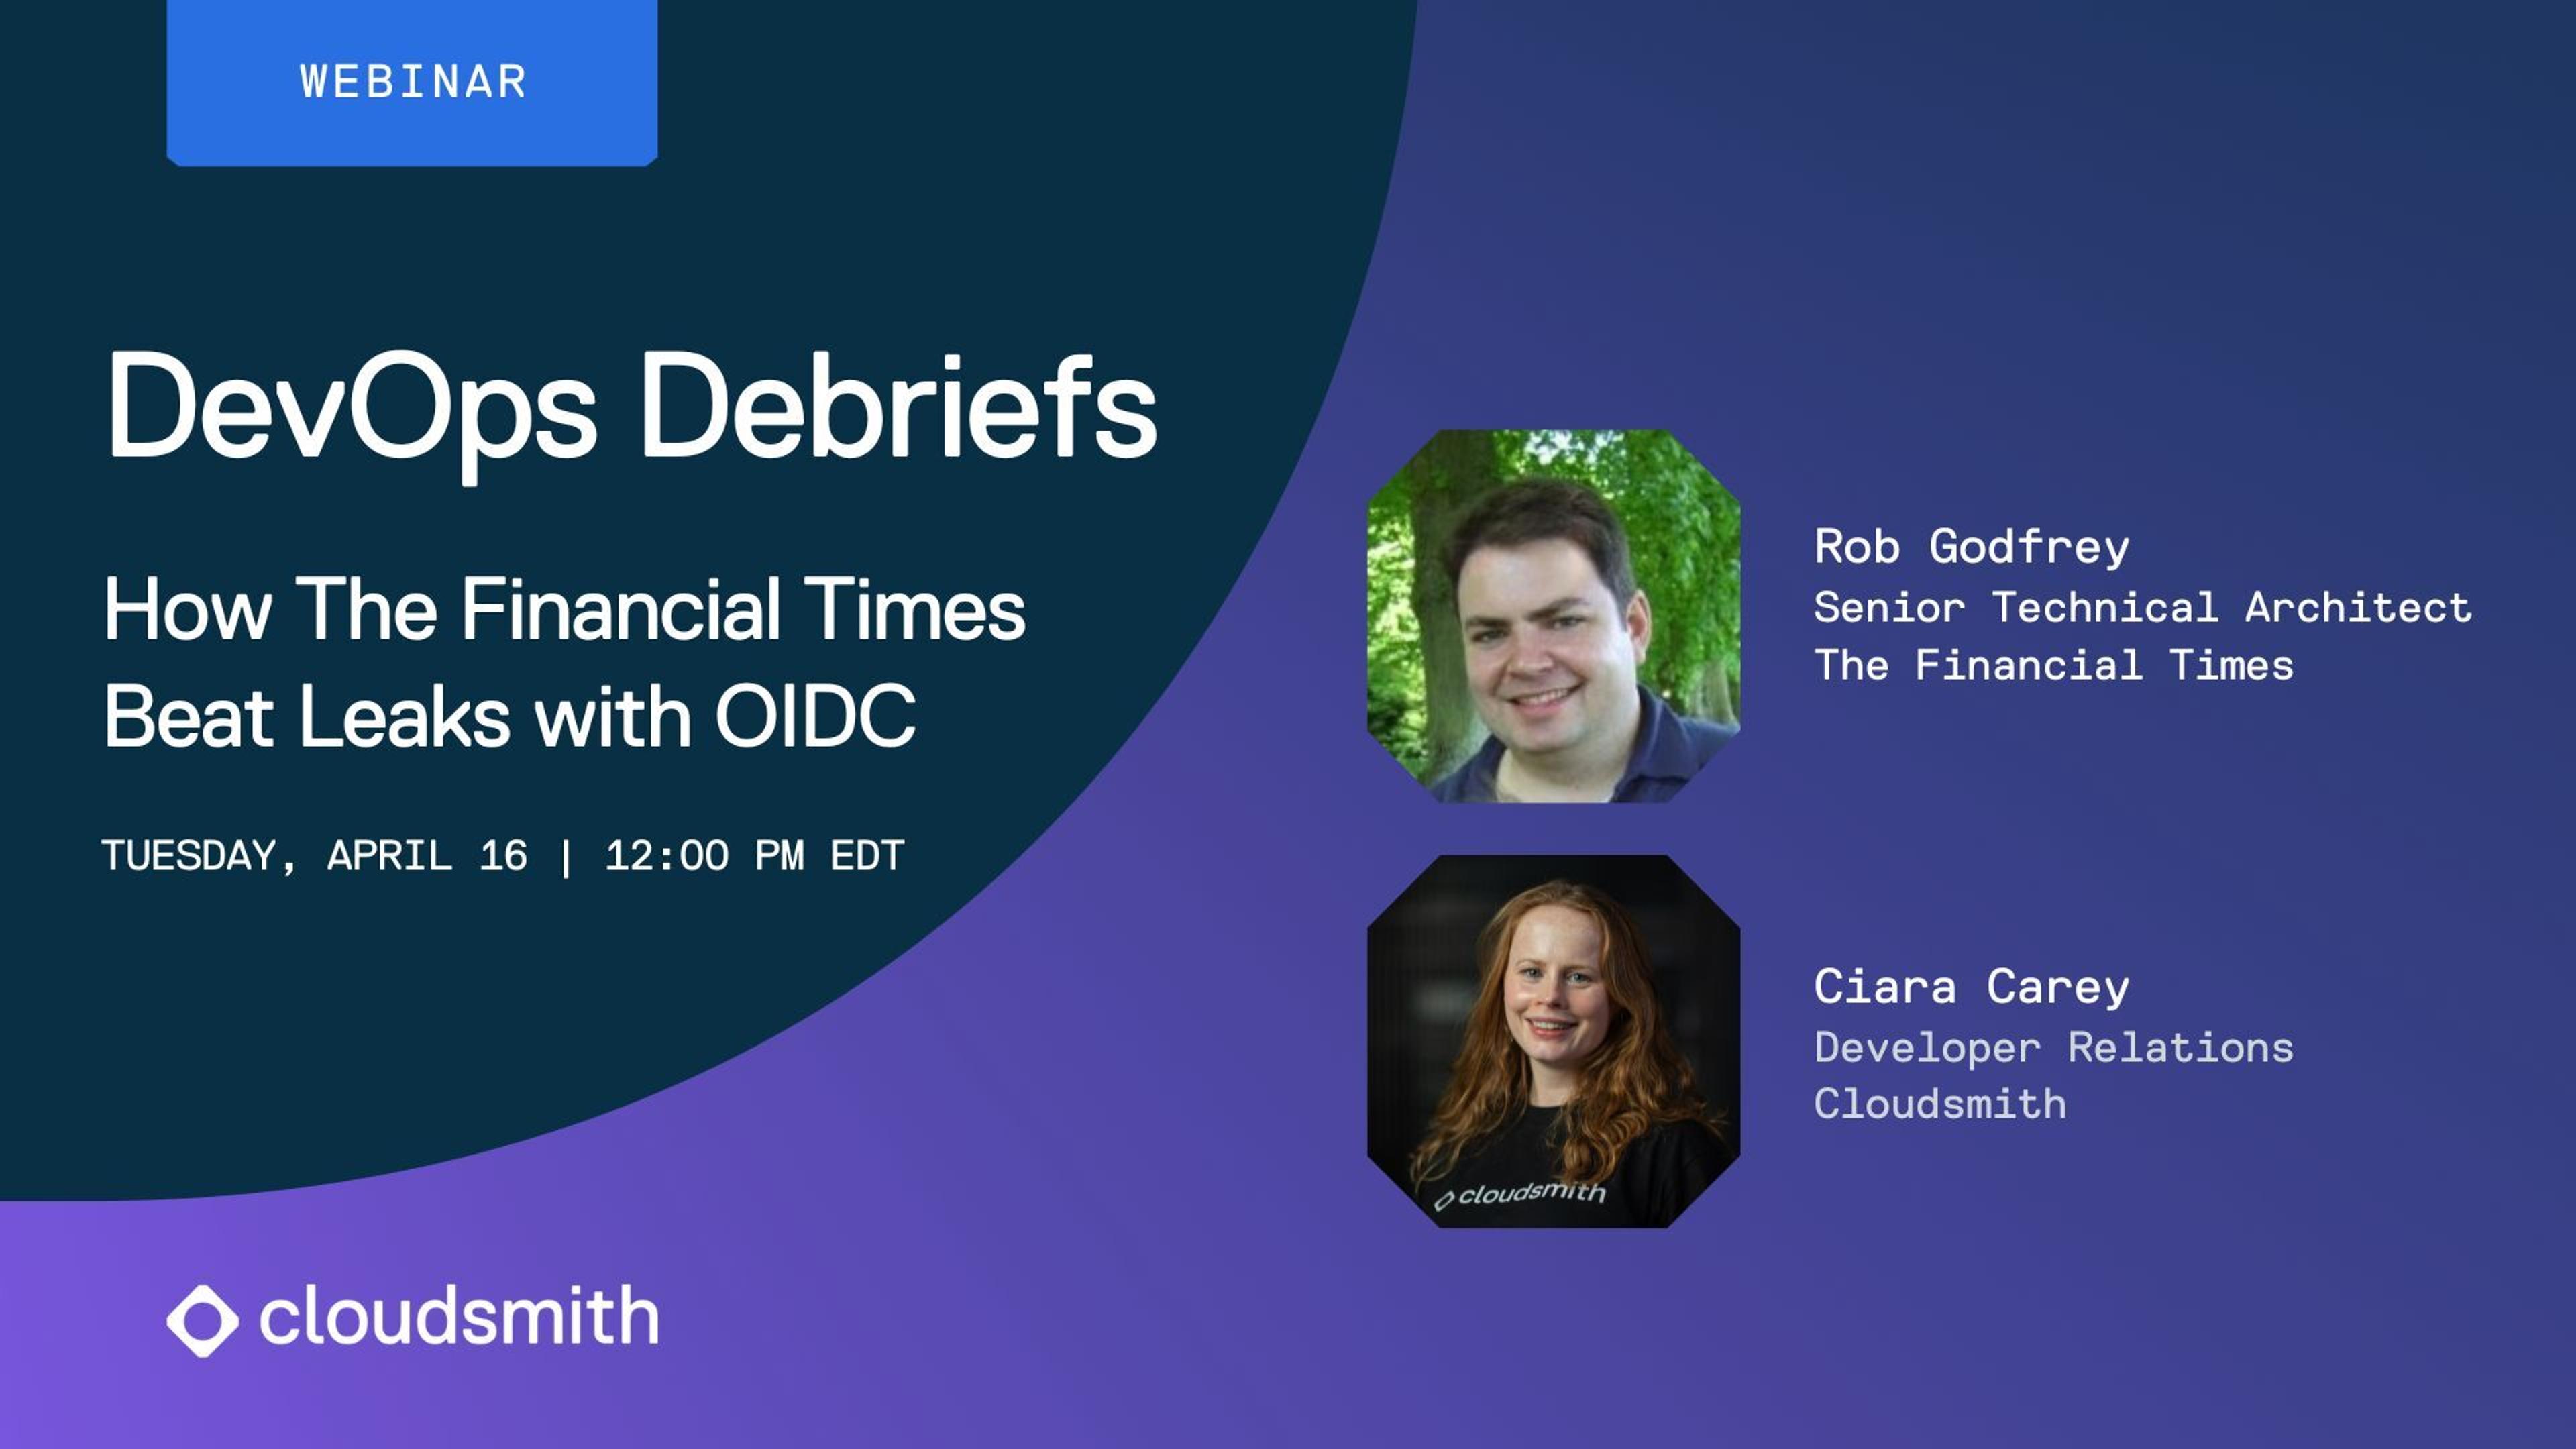 DevOps Debriefs: How The Financial Times Beat Leaks with OIDC